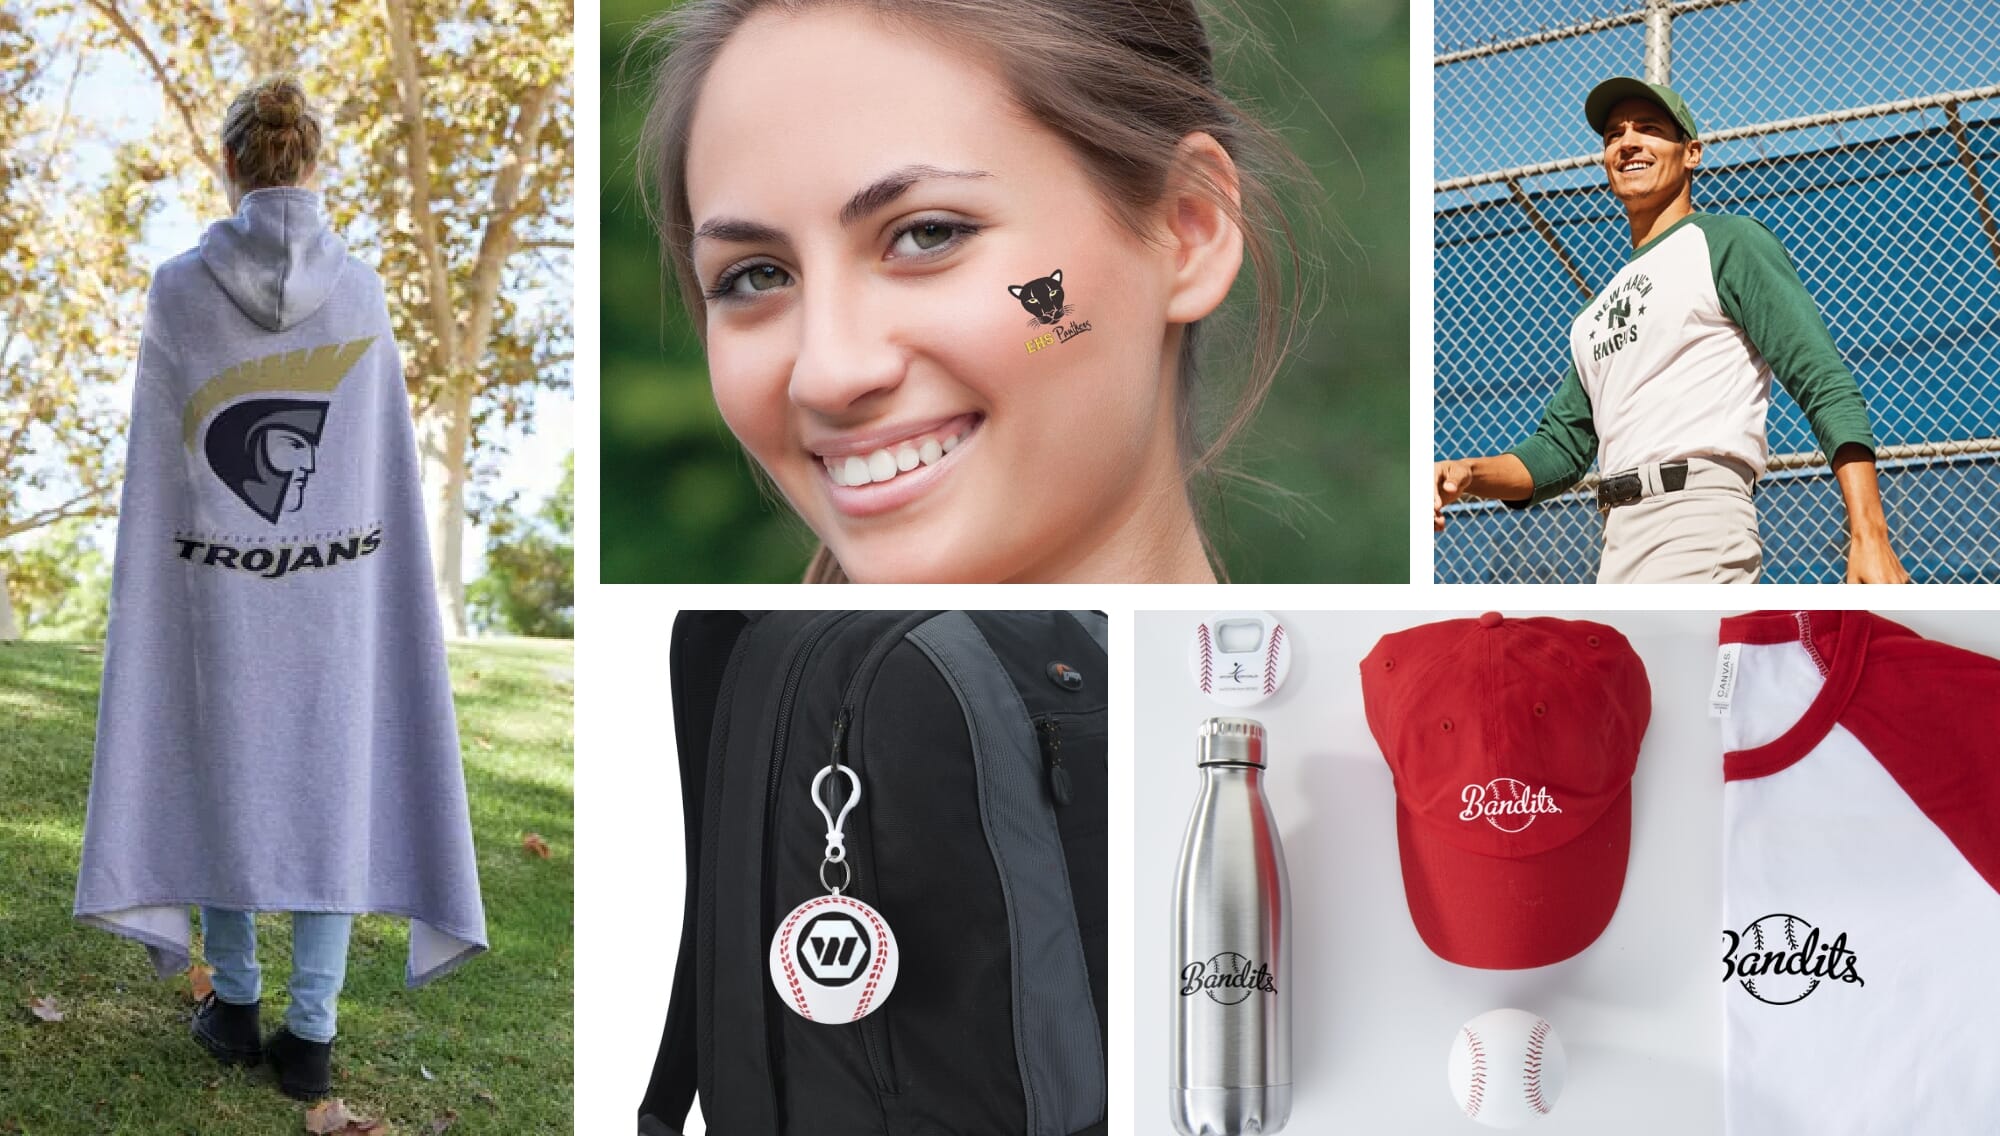 Baseball Team Gift Ideas and Ballpark Giveaways for America's Greatest Pastime